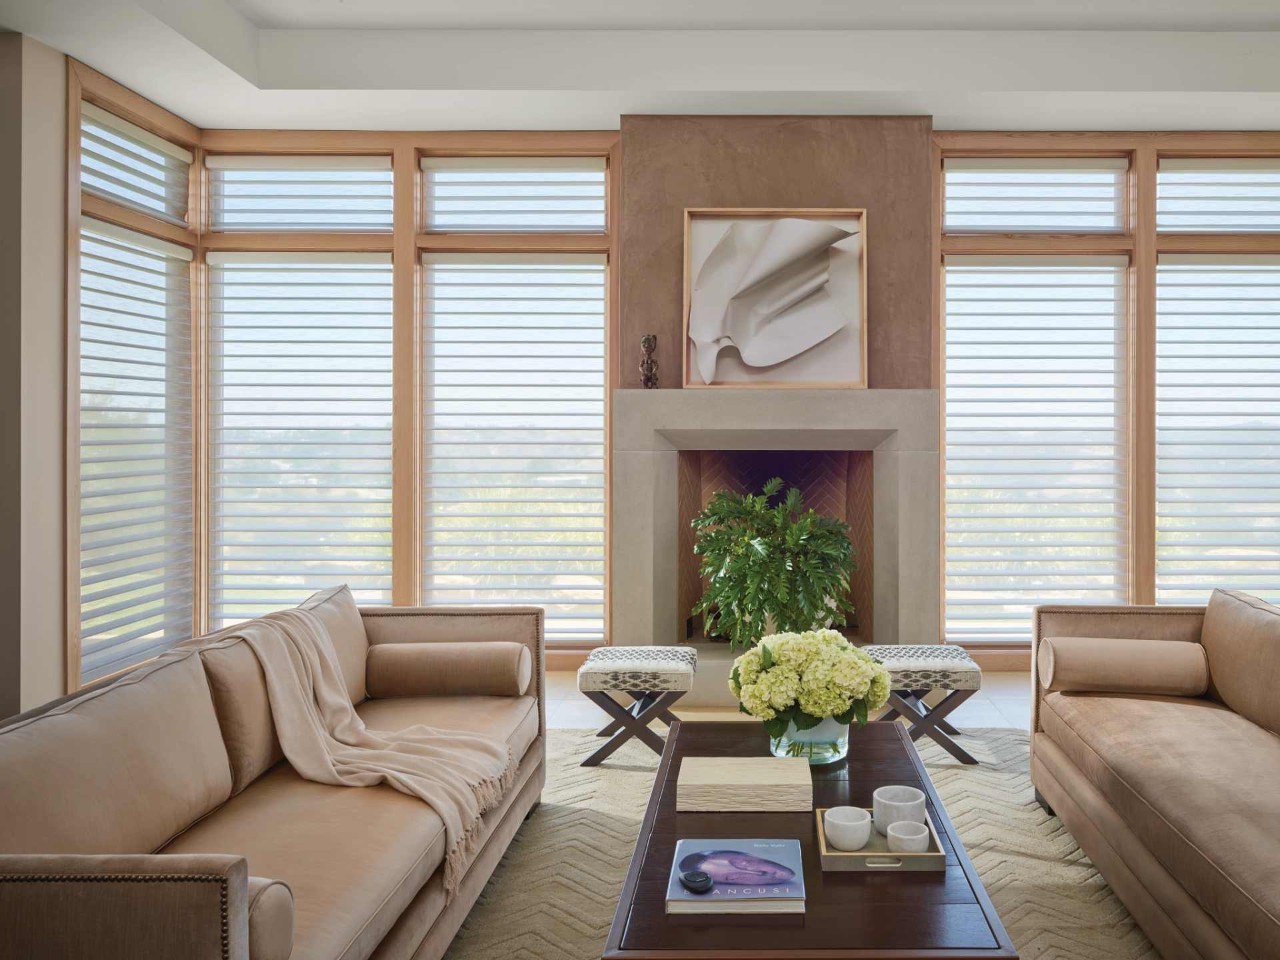 Hunter Douglas window treatments equipped with PowerView® Automation in a family home